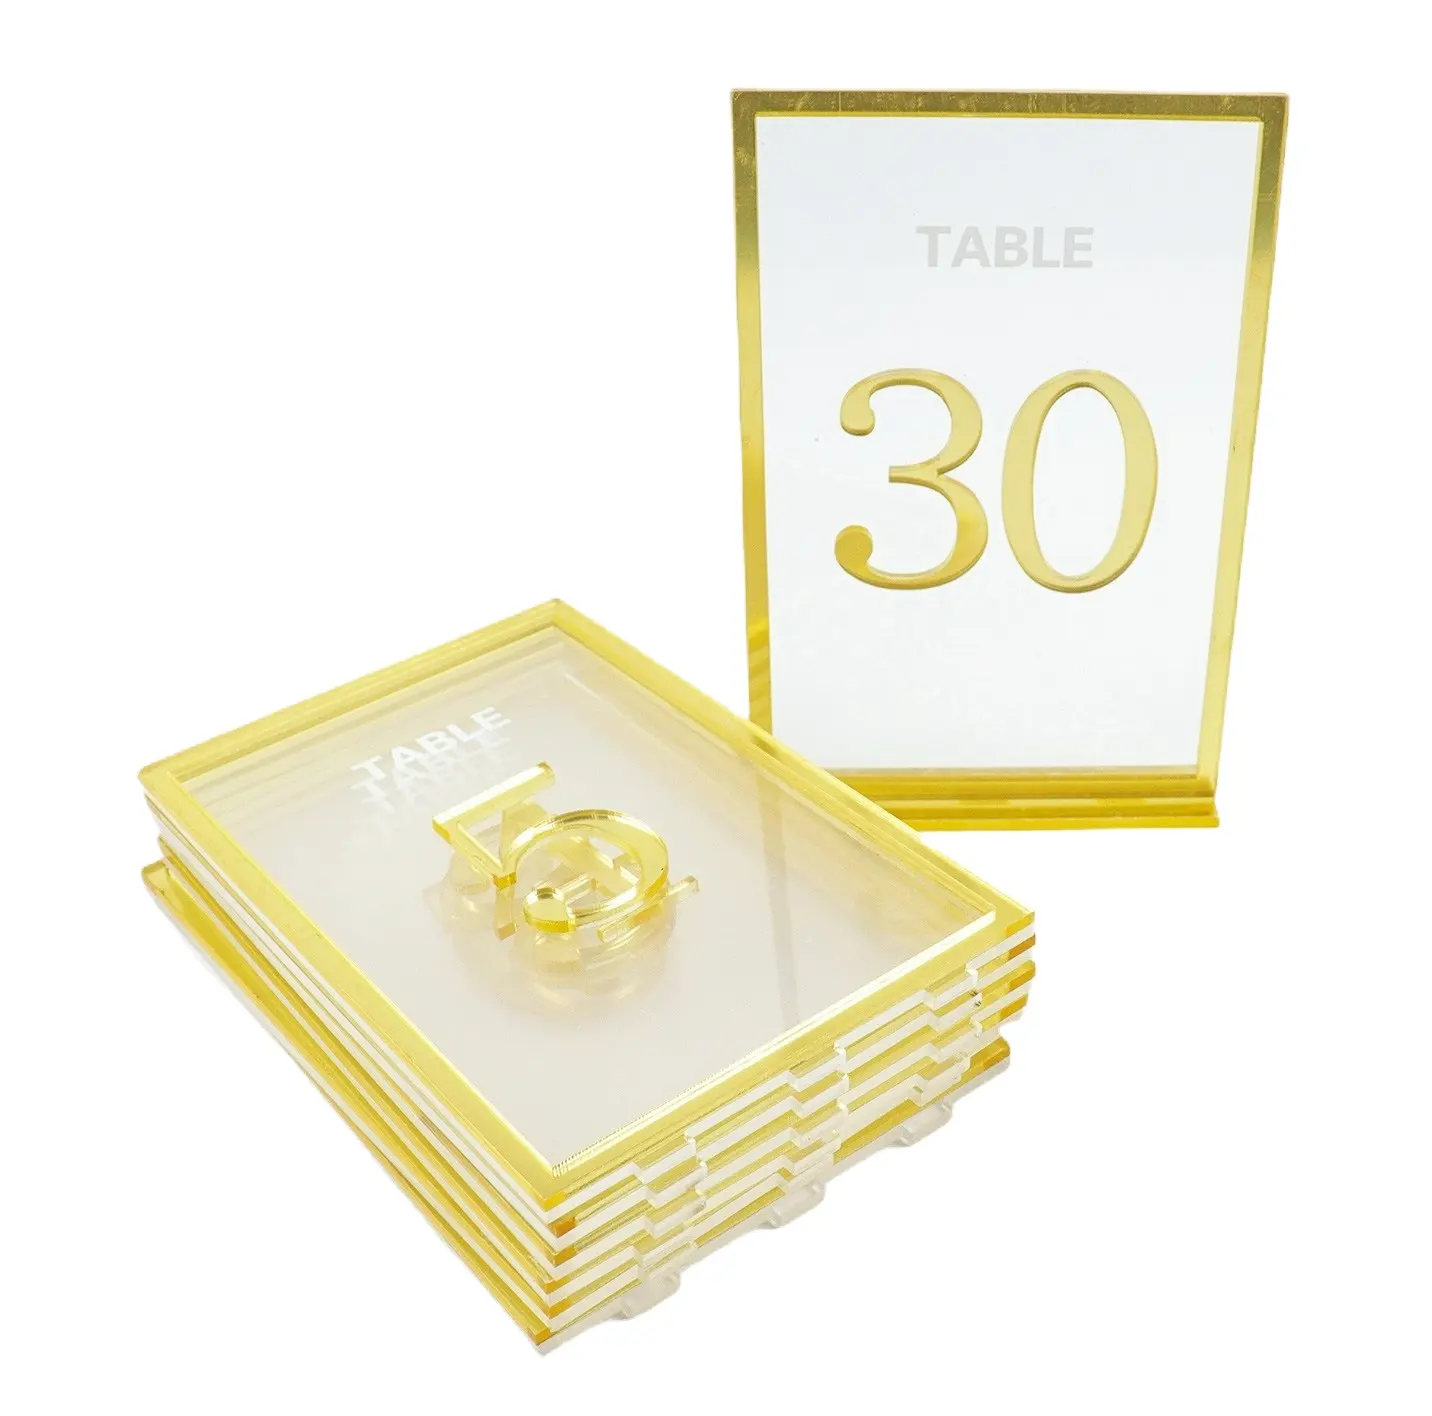 SZYMVIP Acrylic Laser Cut Gold Borders Frames Business Acrlic Table Number with Stand Holders for Wedding Meeting